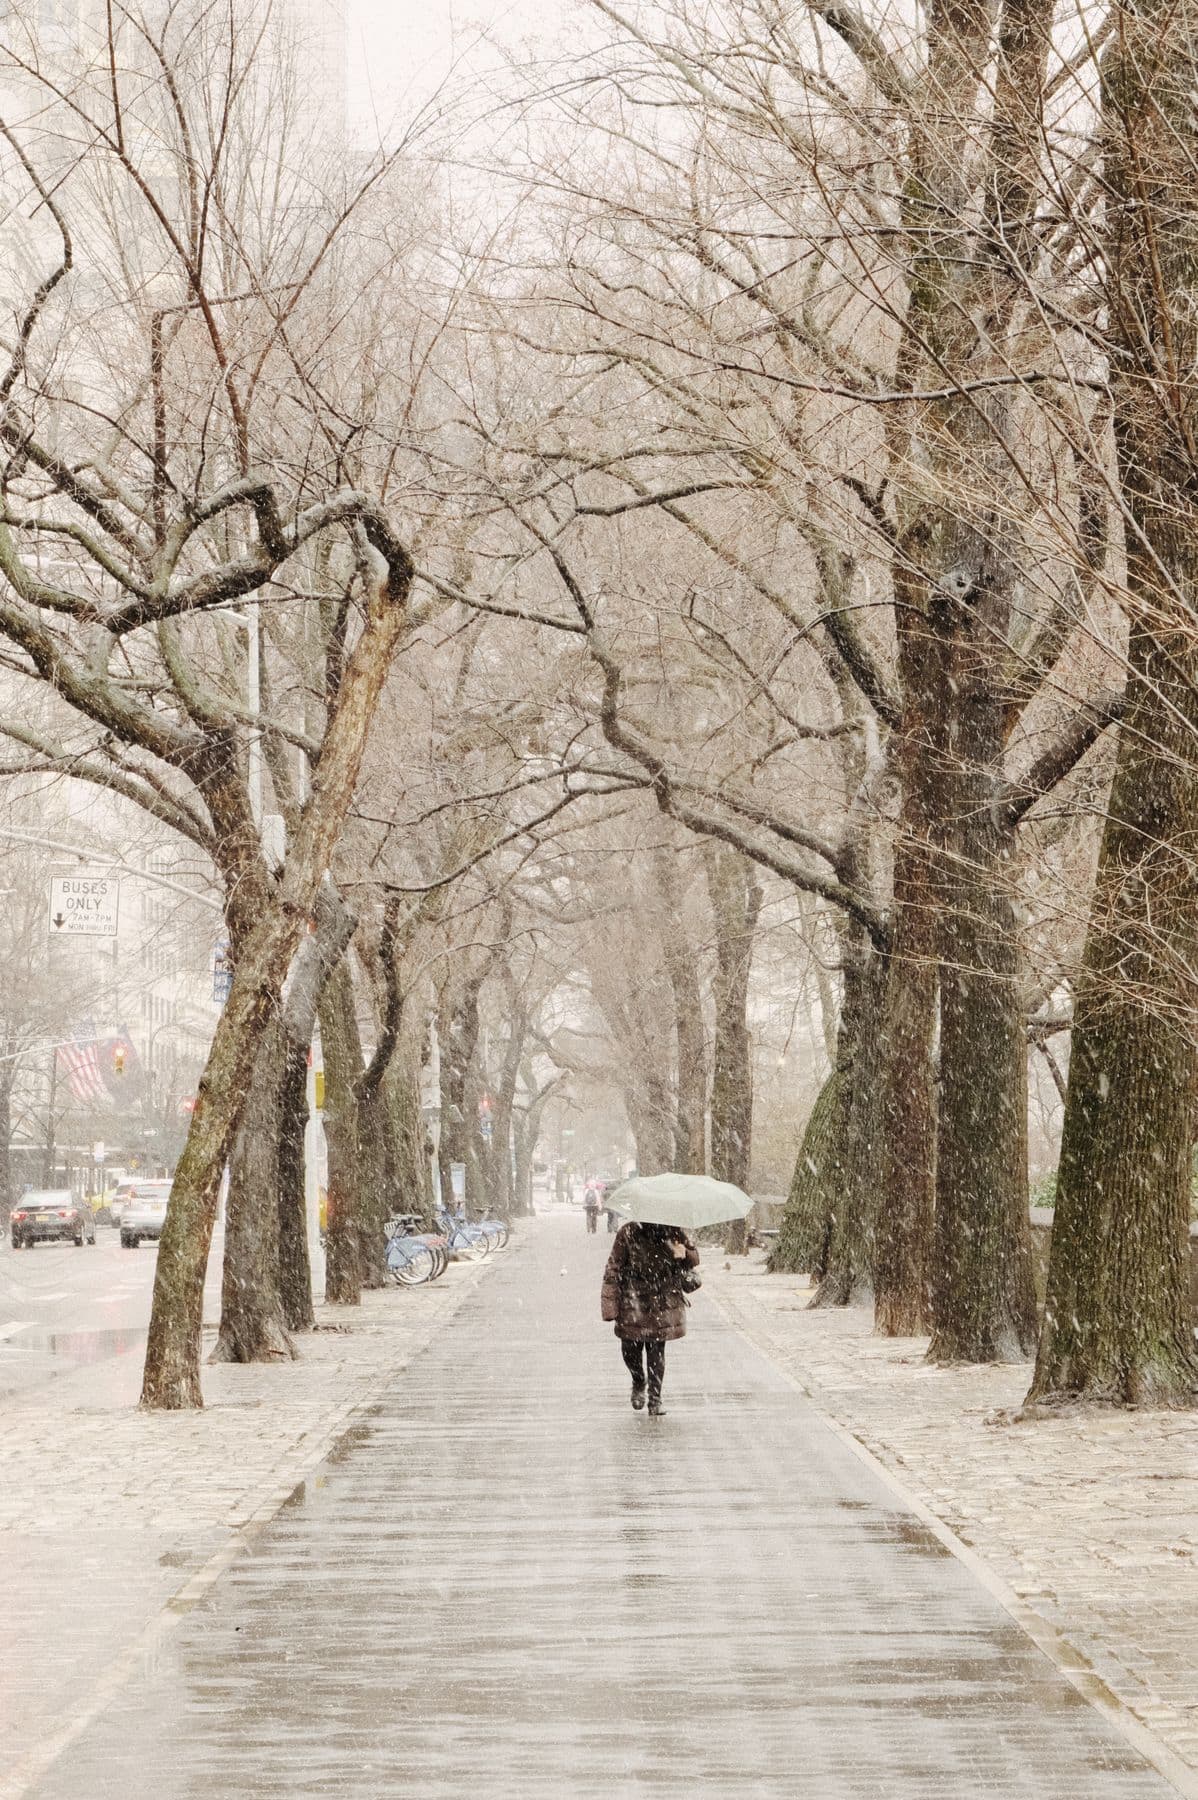 A woman walks down a city sidewalk lined with trees in a snowstorm holding an umbrella